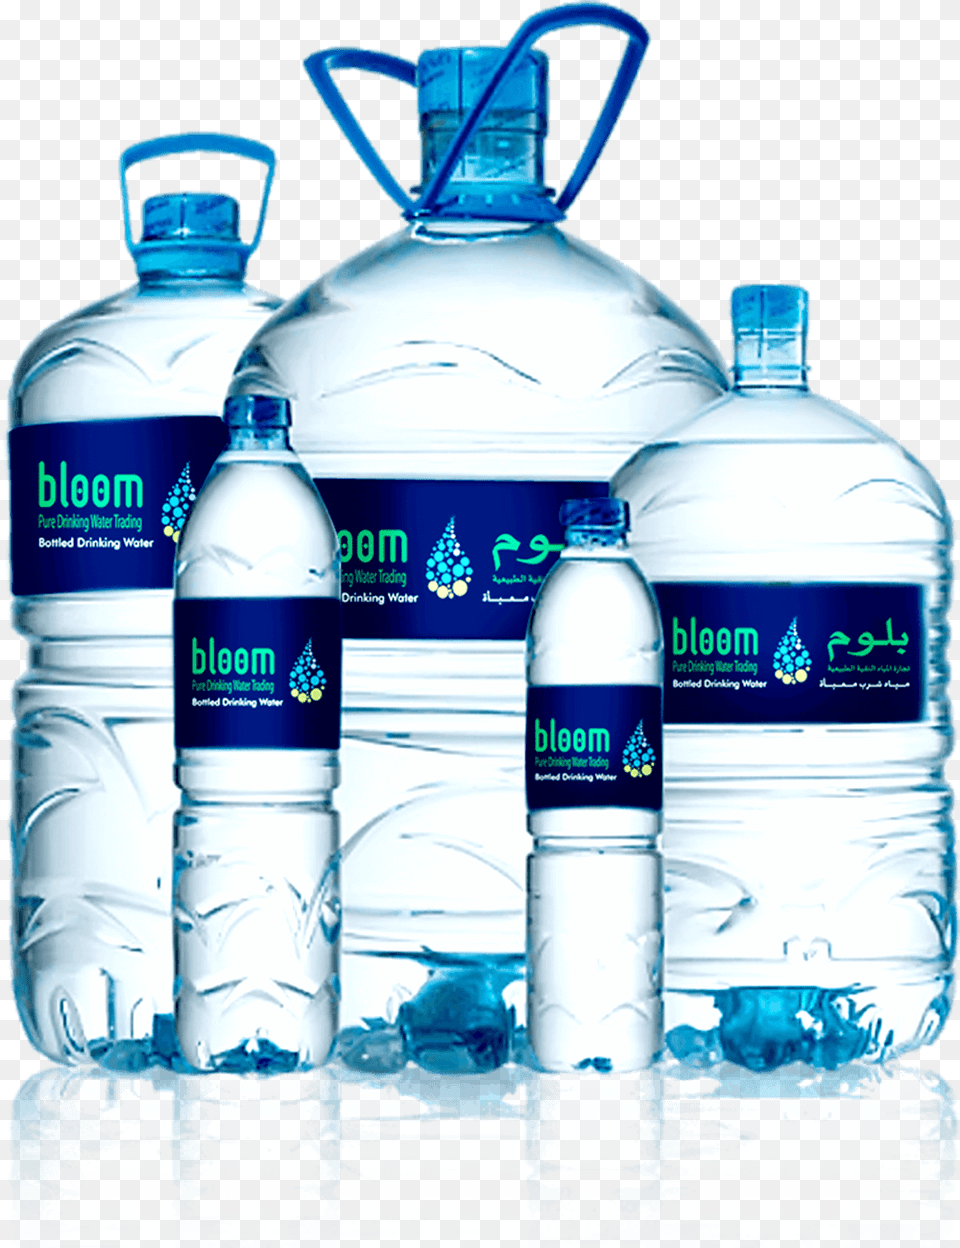 Transparent Pure Drinking Water Packaged Drinking Water Backgrounds, Beverage, Bottle, Mineral Water, Water Bottle Png Image